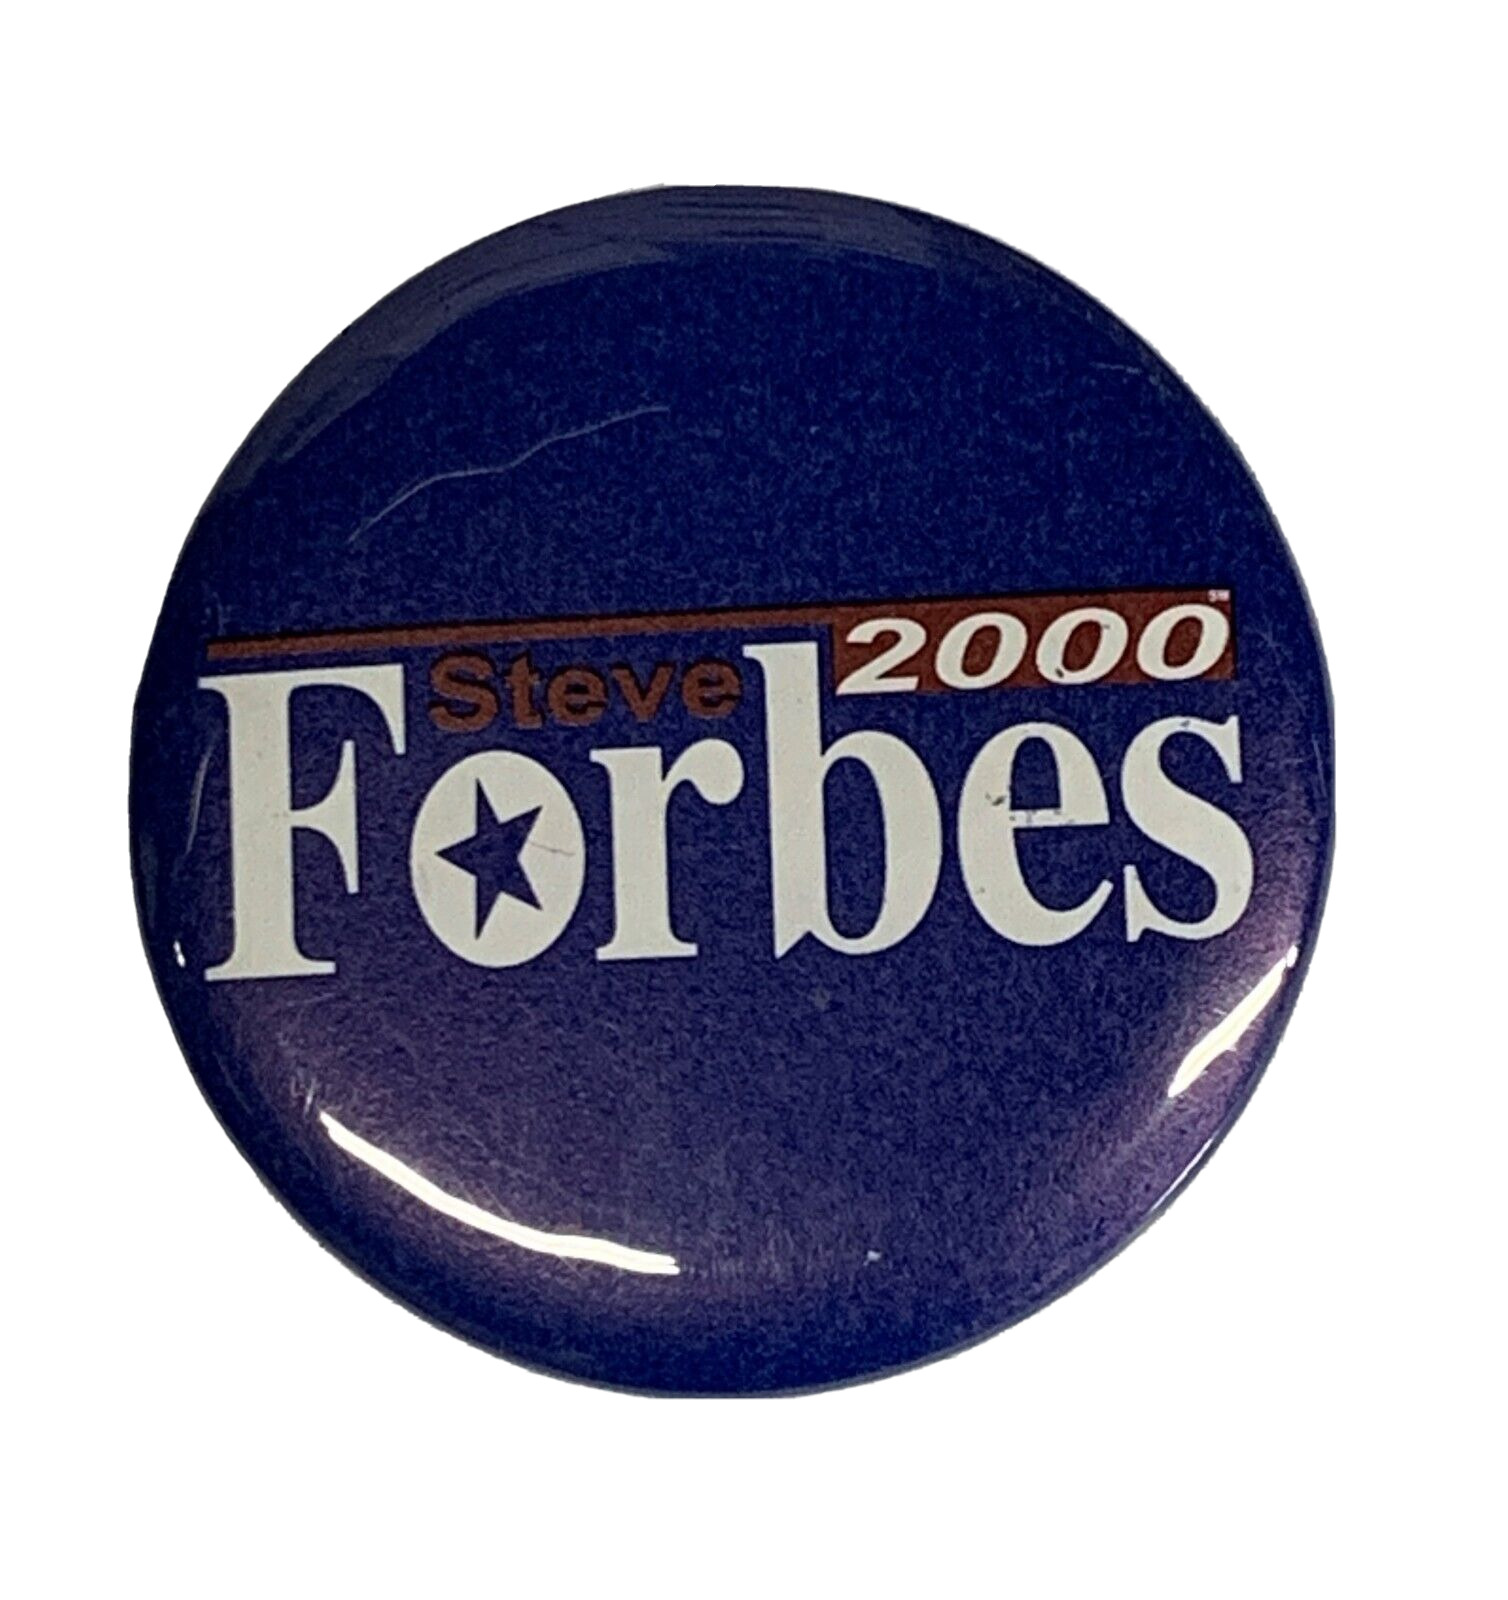 Steve Forbes President 2000 Campaign Button GOP Republican Pinback Pin